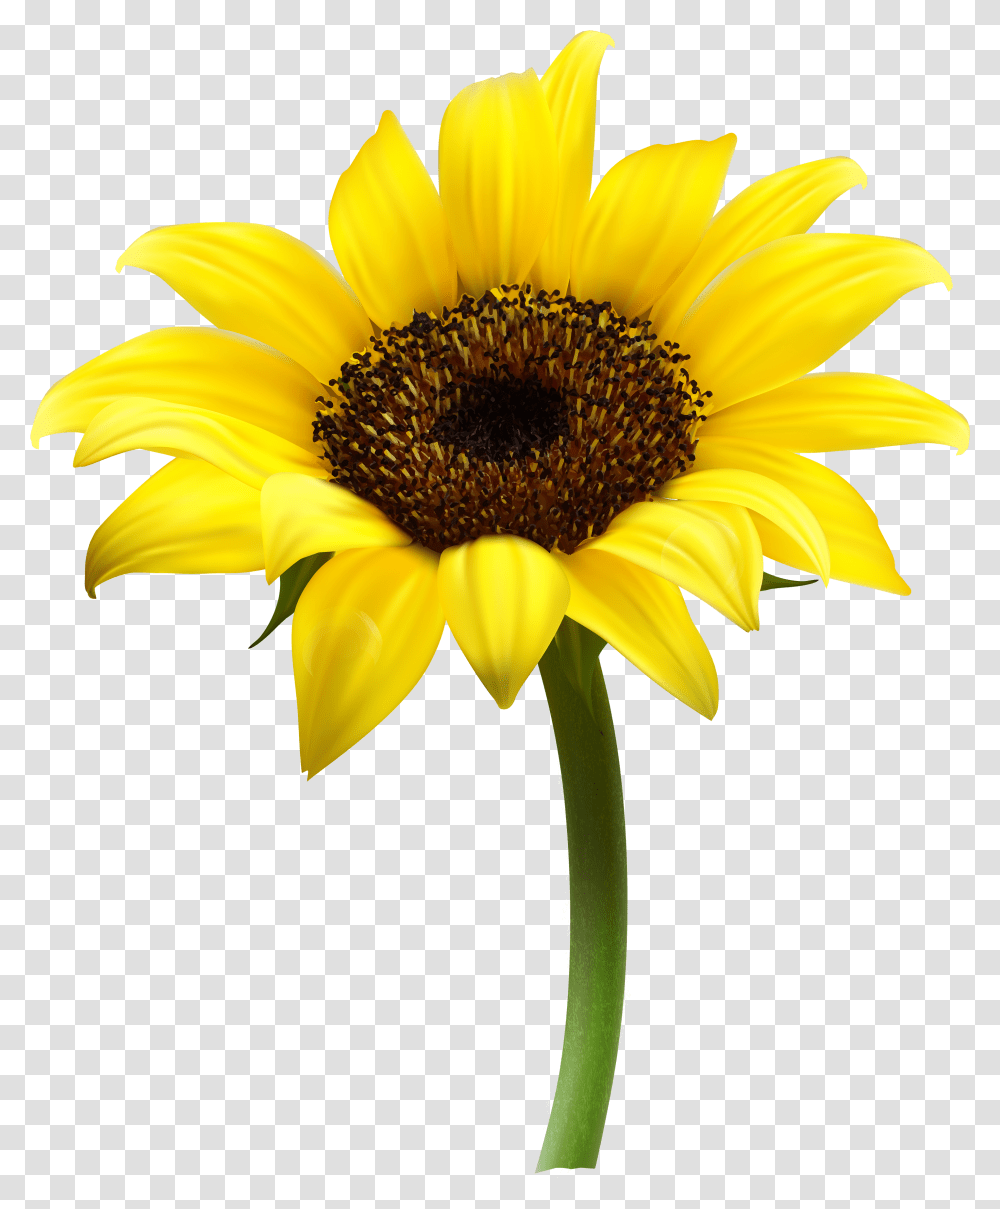 Sunflower Images Free Download Sunflower With No Background, Plant, Blossom, Daisy, Daisies Transparent Png